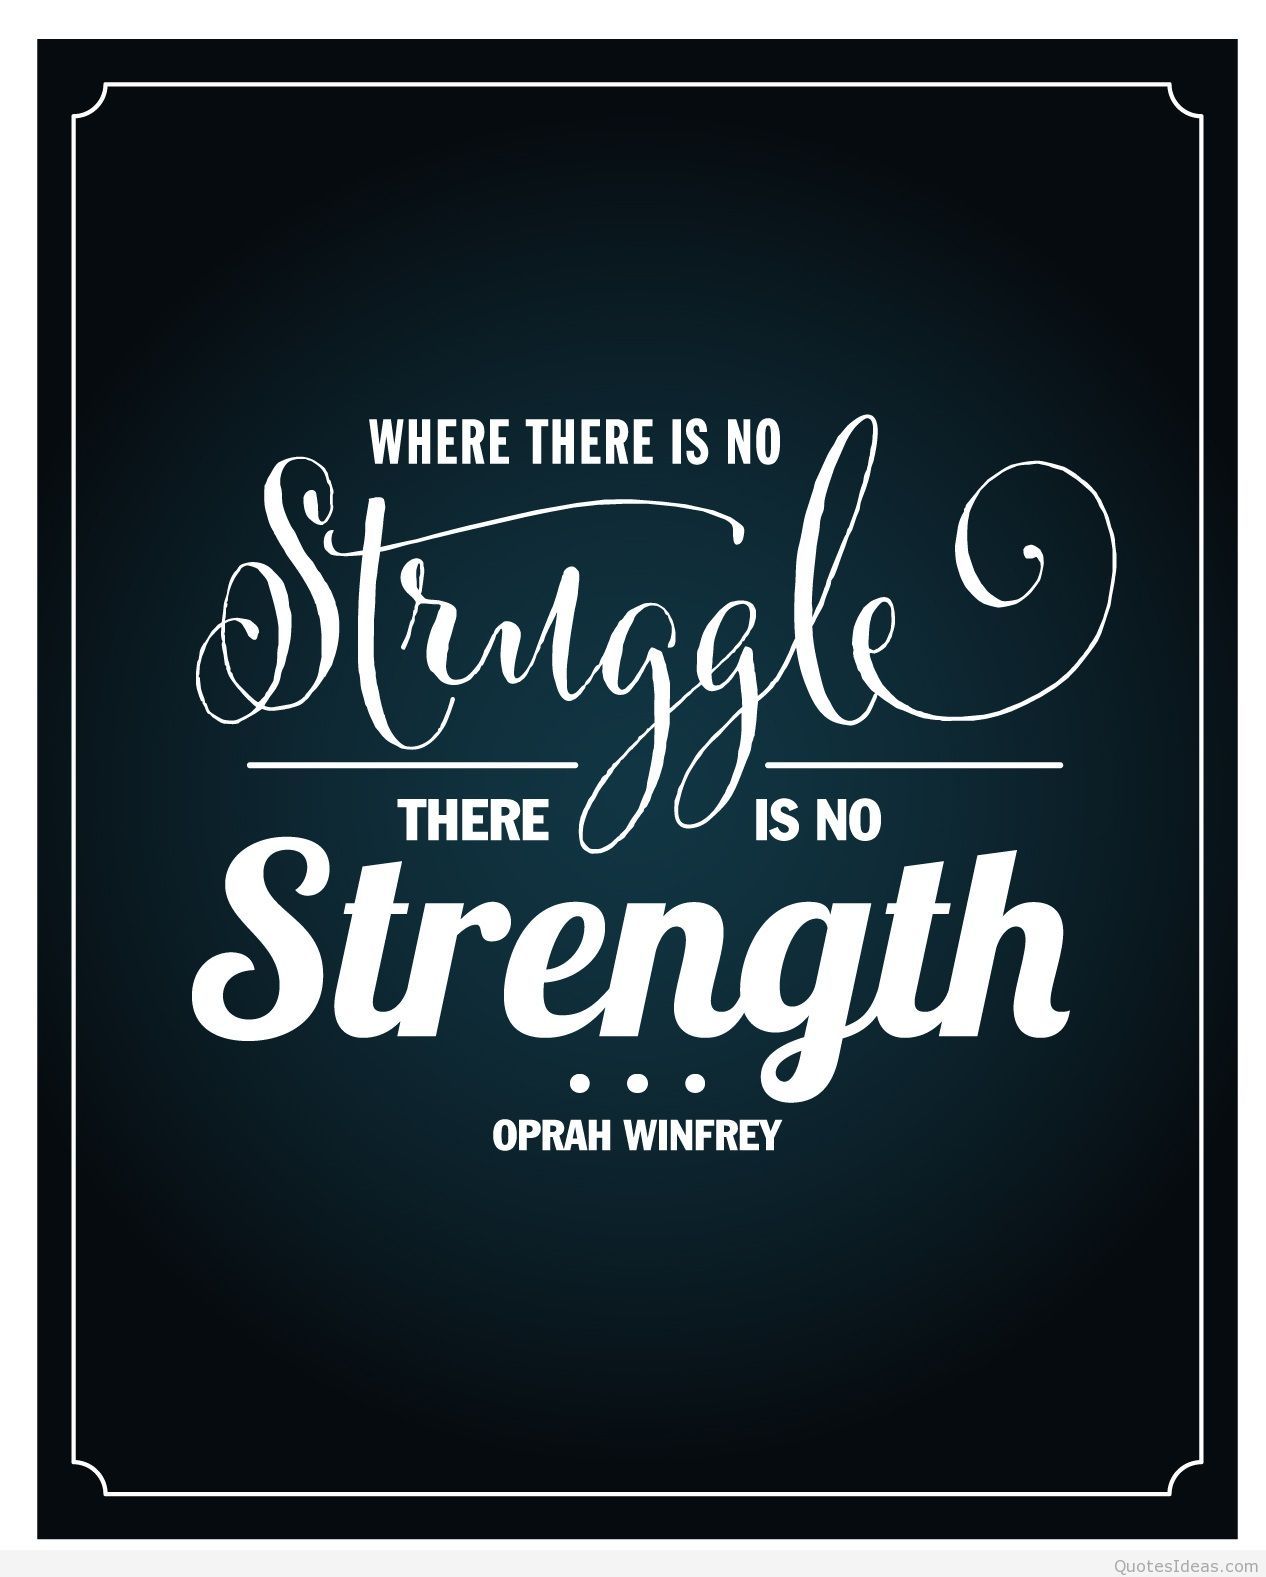 Strength quotes image and background hd